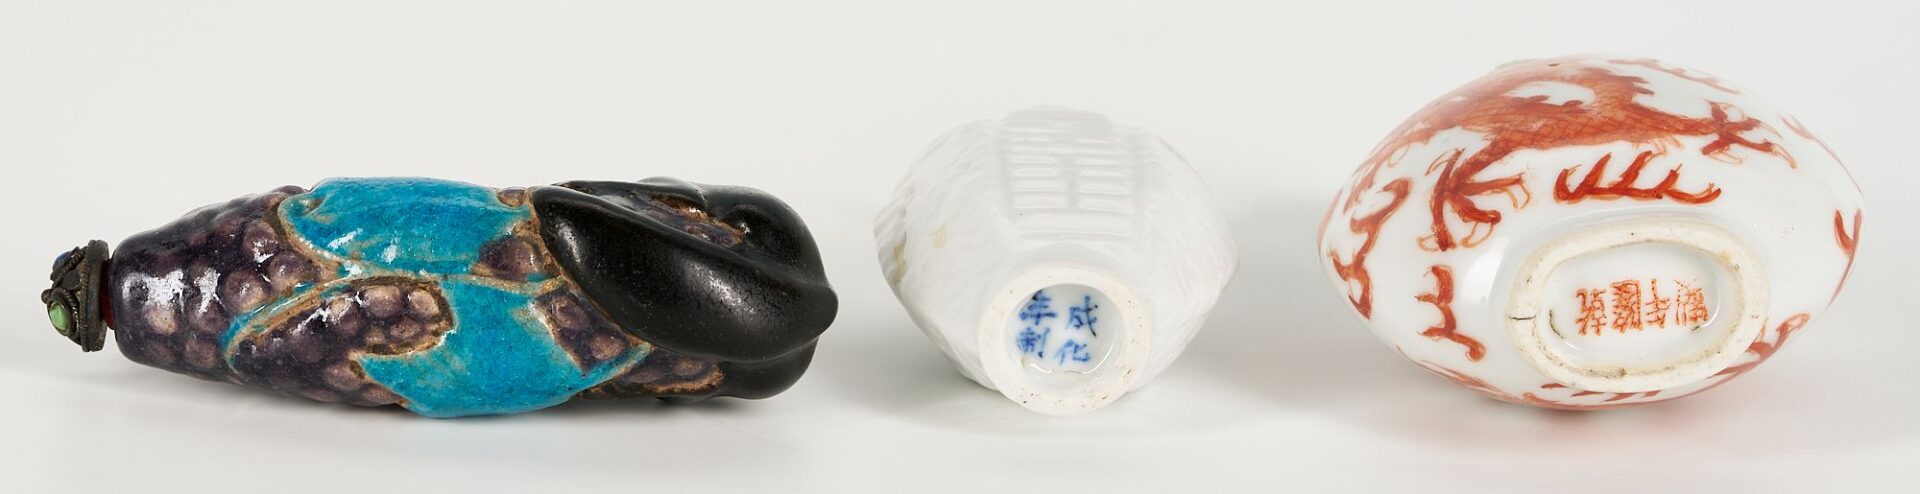 Lot 20: 3 Chinese Ceramic Snuff Bottles incl. Figural